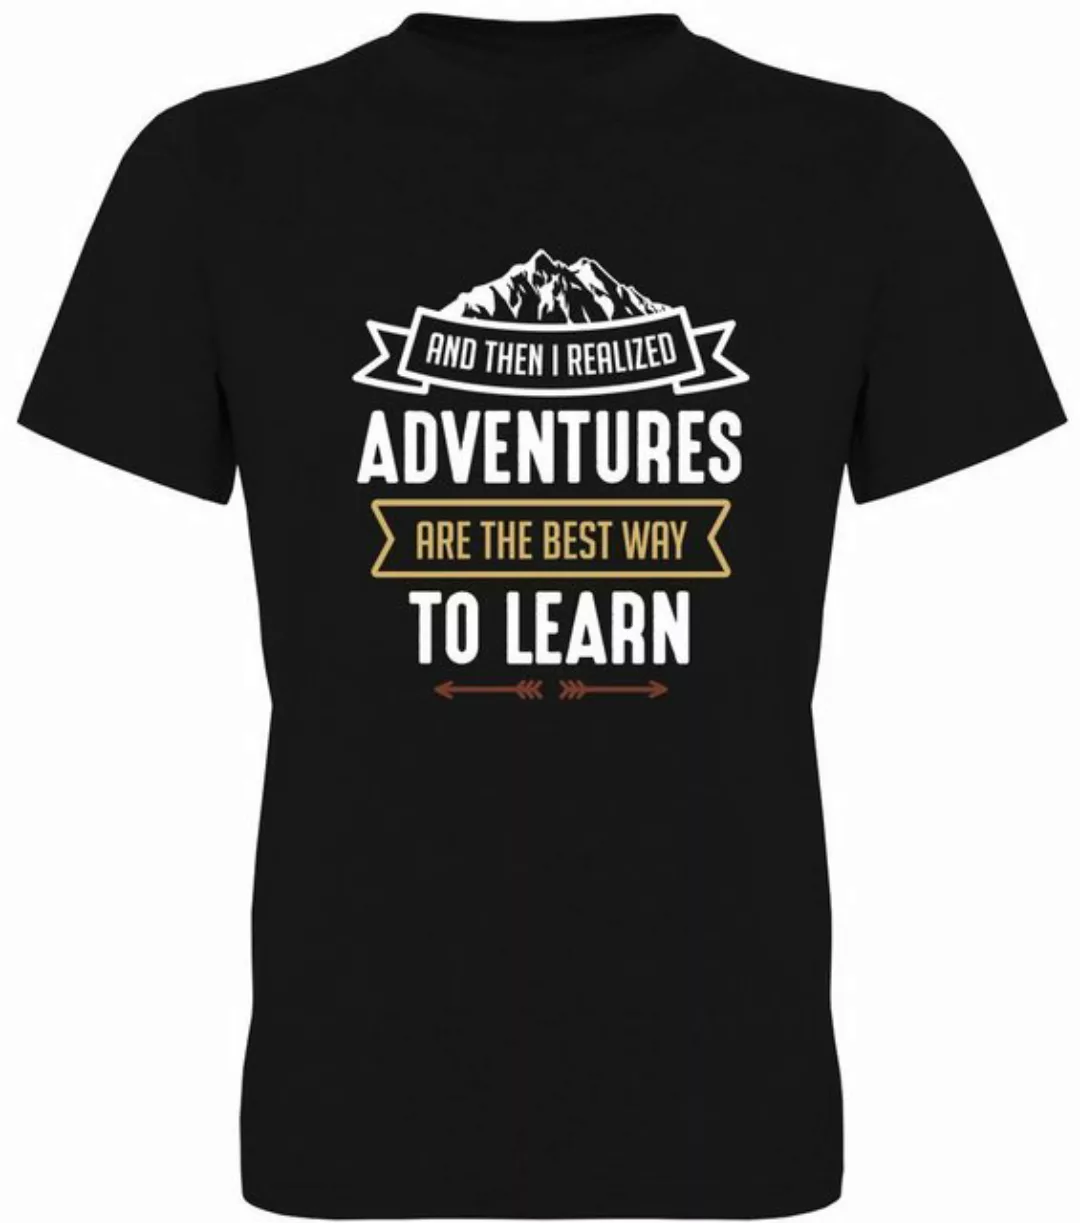 G-graphics T-Shirt And then I realized Adventures are the best was to learn günstig online kaufen